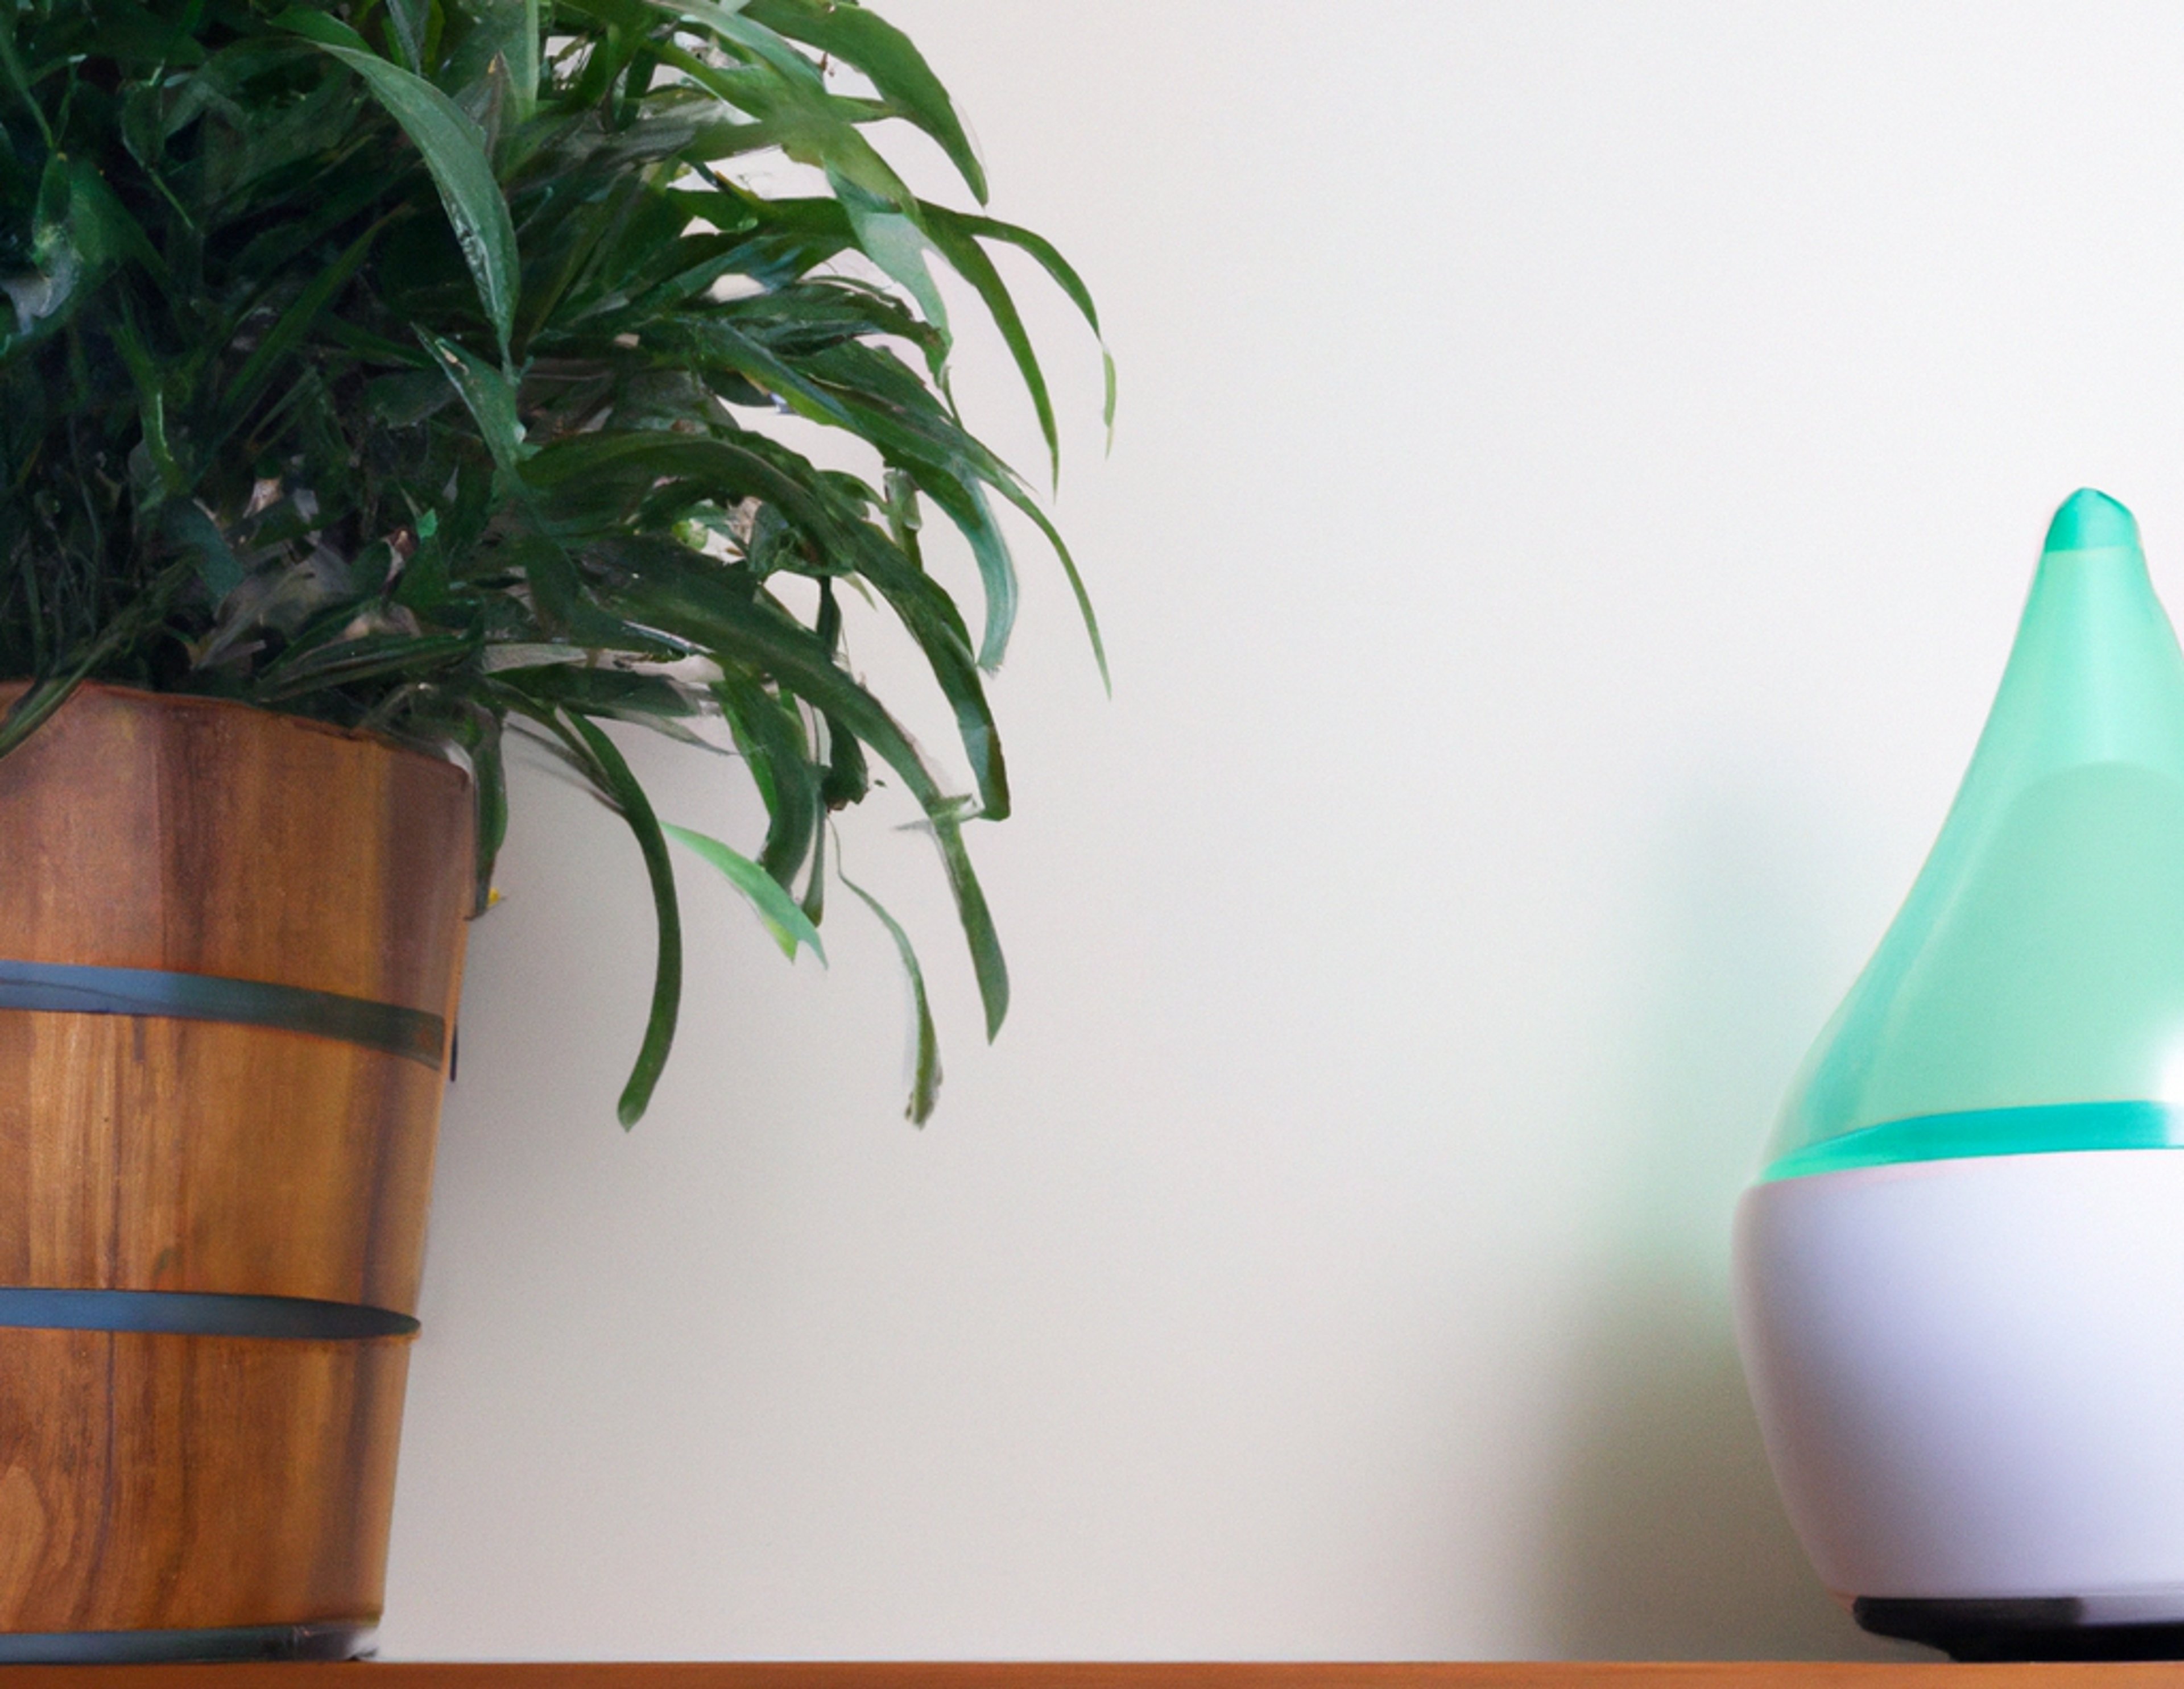 How Often Should You Clean a Humidifier?